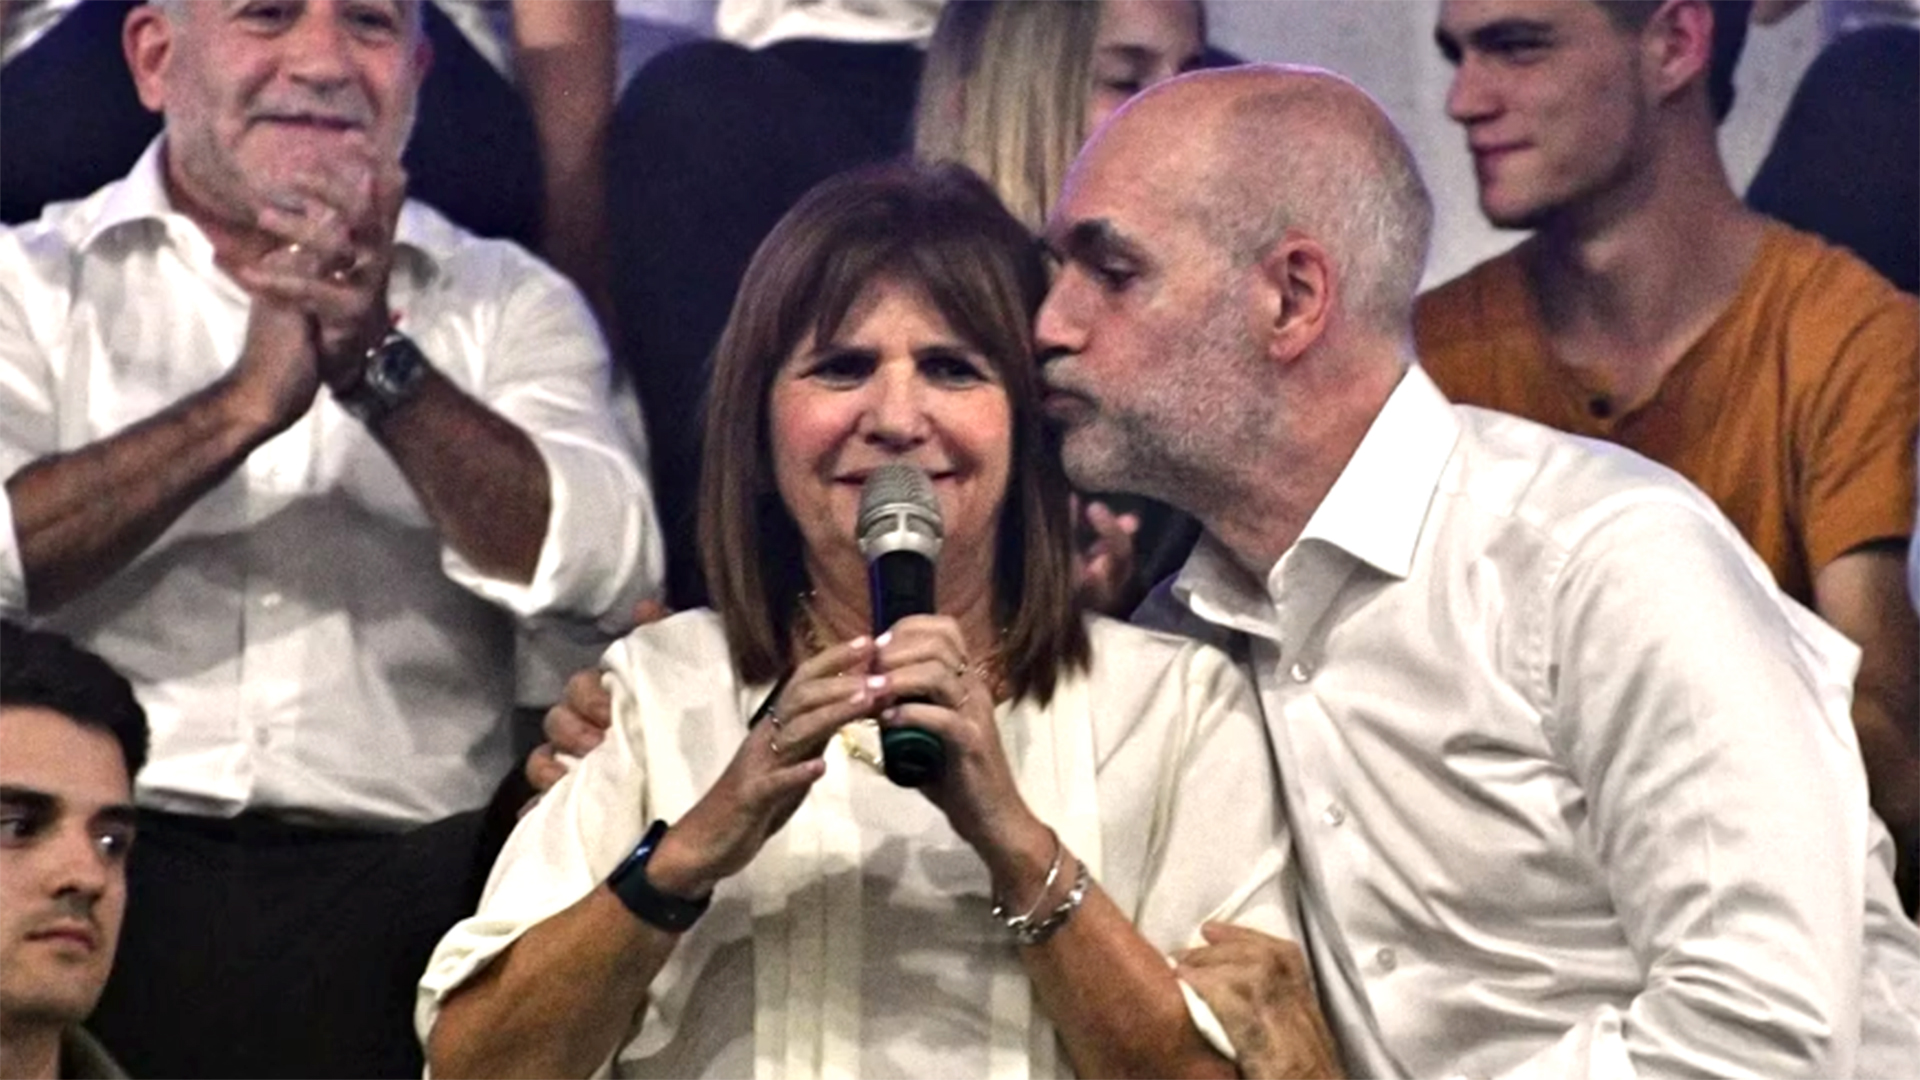 The kiss of Horacio Rodríguez Larreta to Patricia Bullrich at the launch of Luis Juez as a candidate for governor of Córdoba